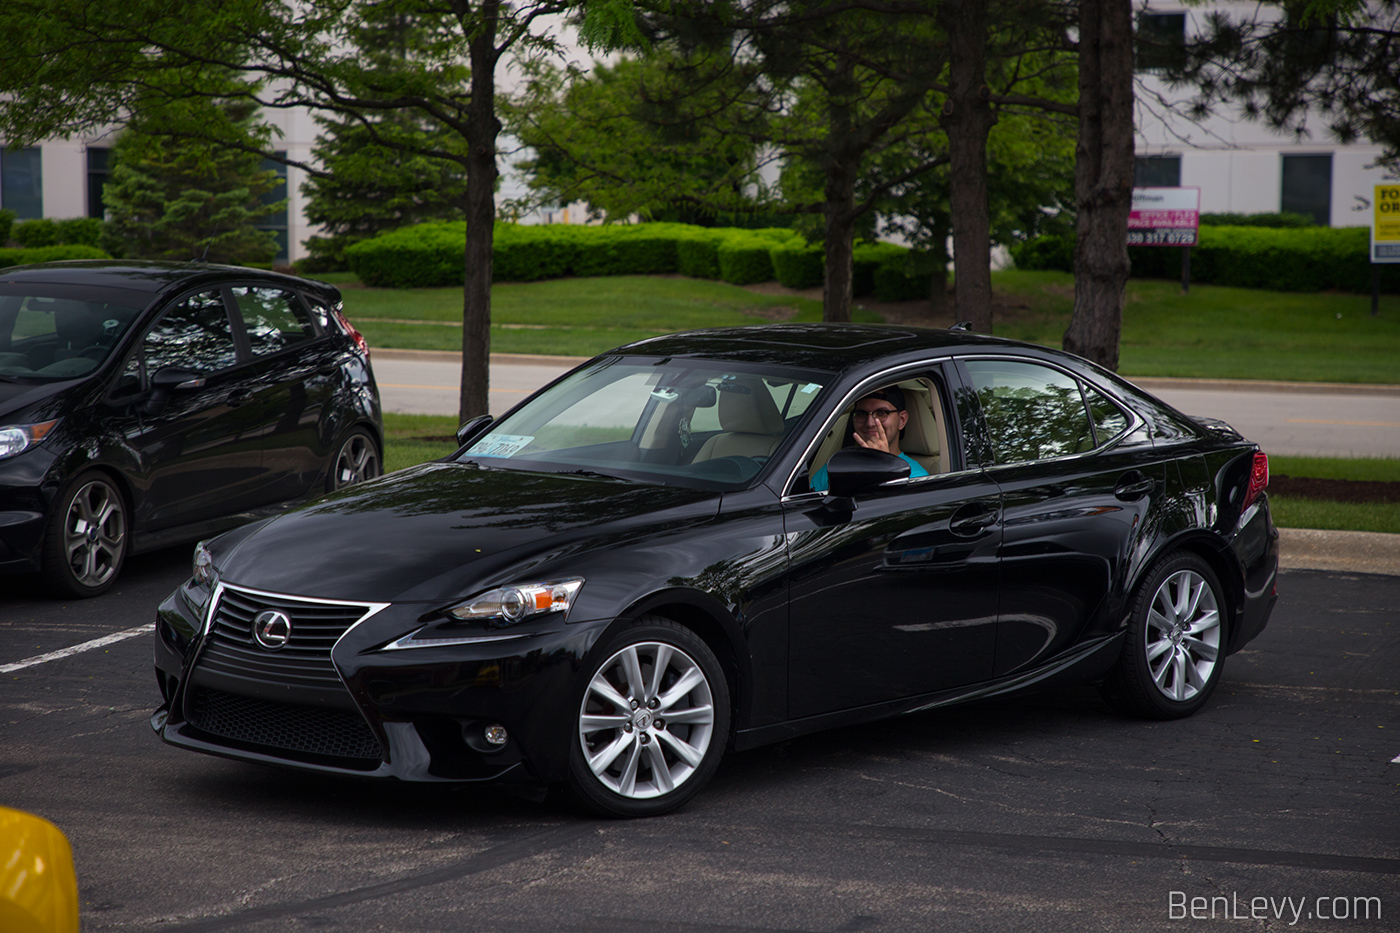 Black Lexus IS300 Rolling Out